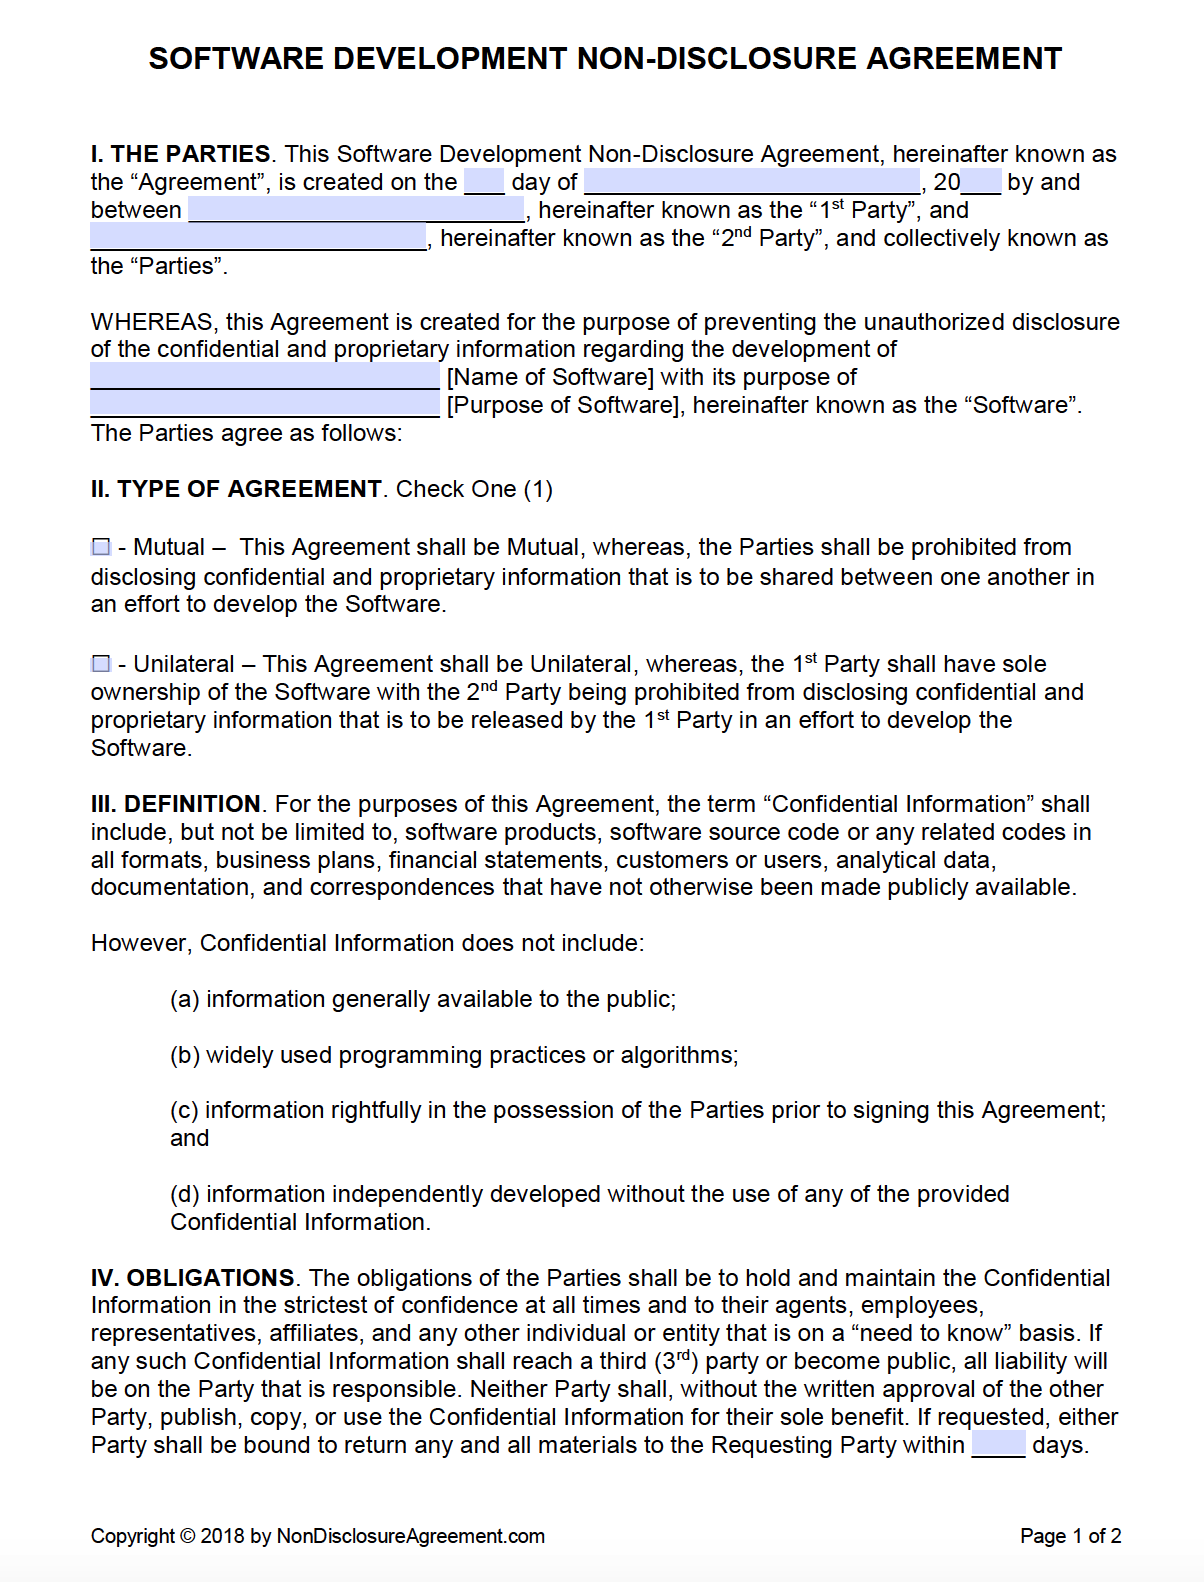 Non Disclosure Agreement Software Code